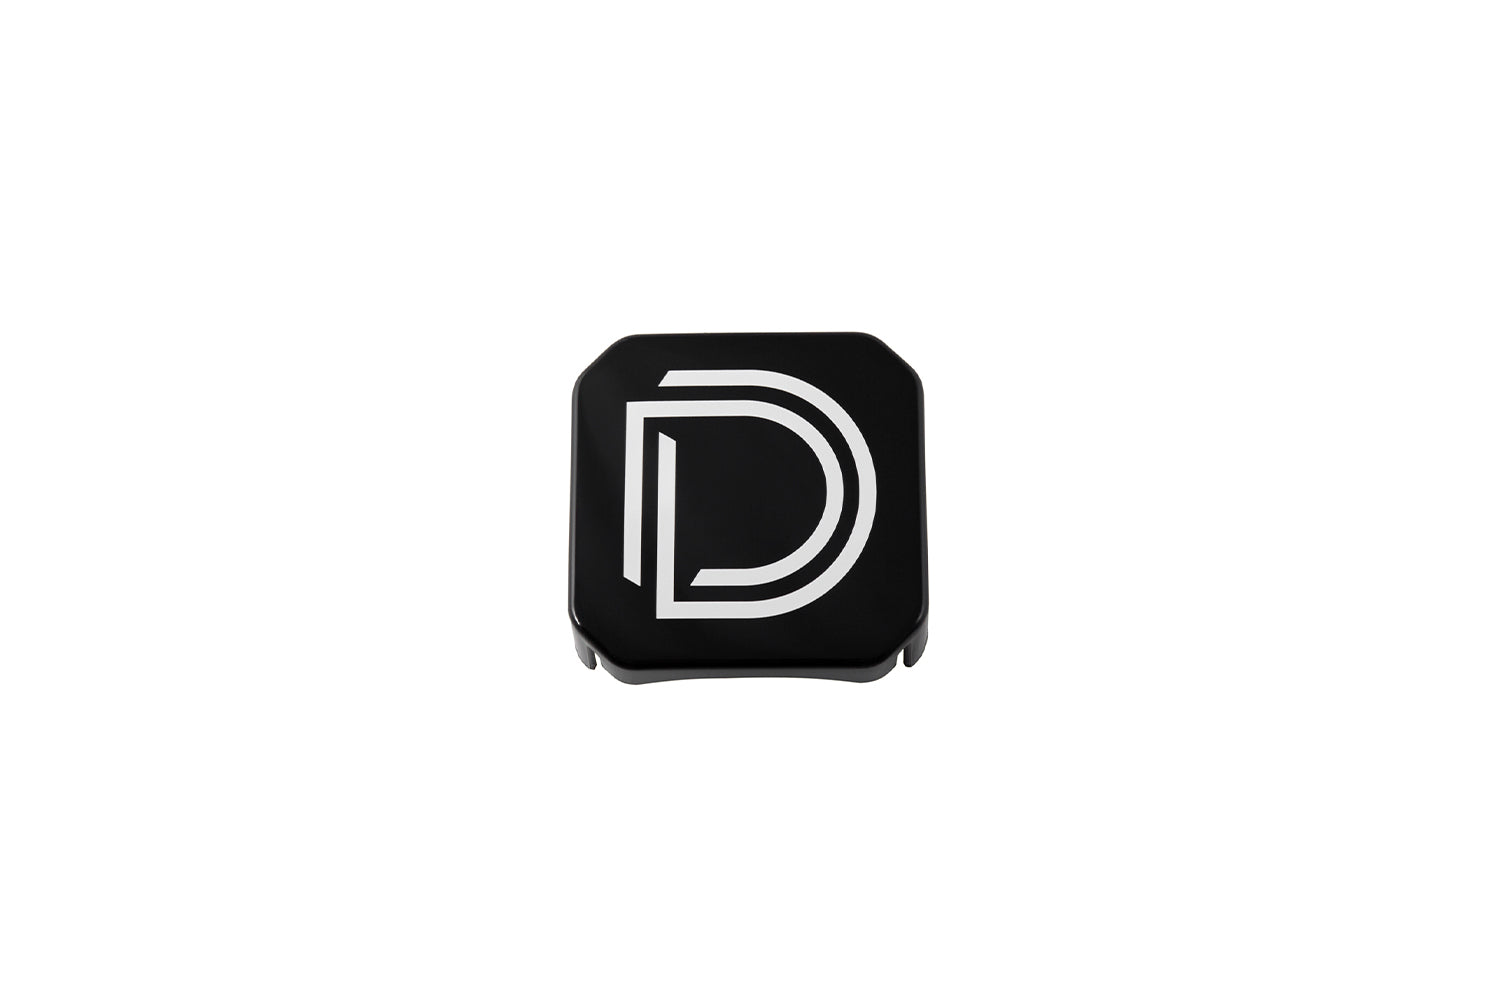 SSC1 Stage Series C1 LED Pod Cover Black (Single) Diode Dynamics-dd6603